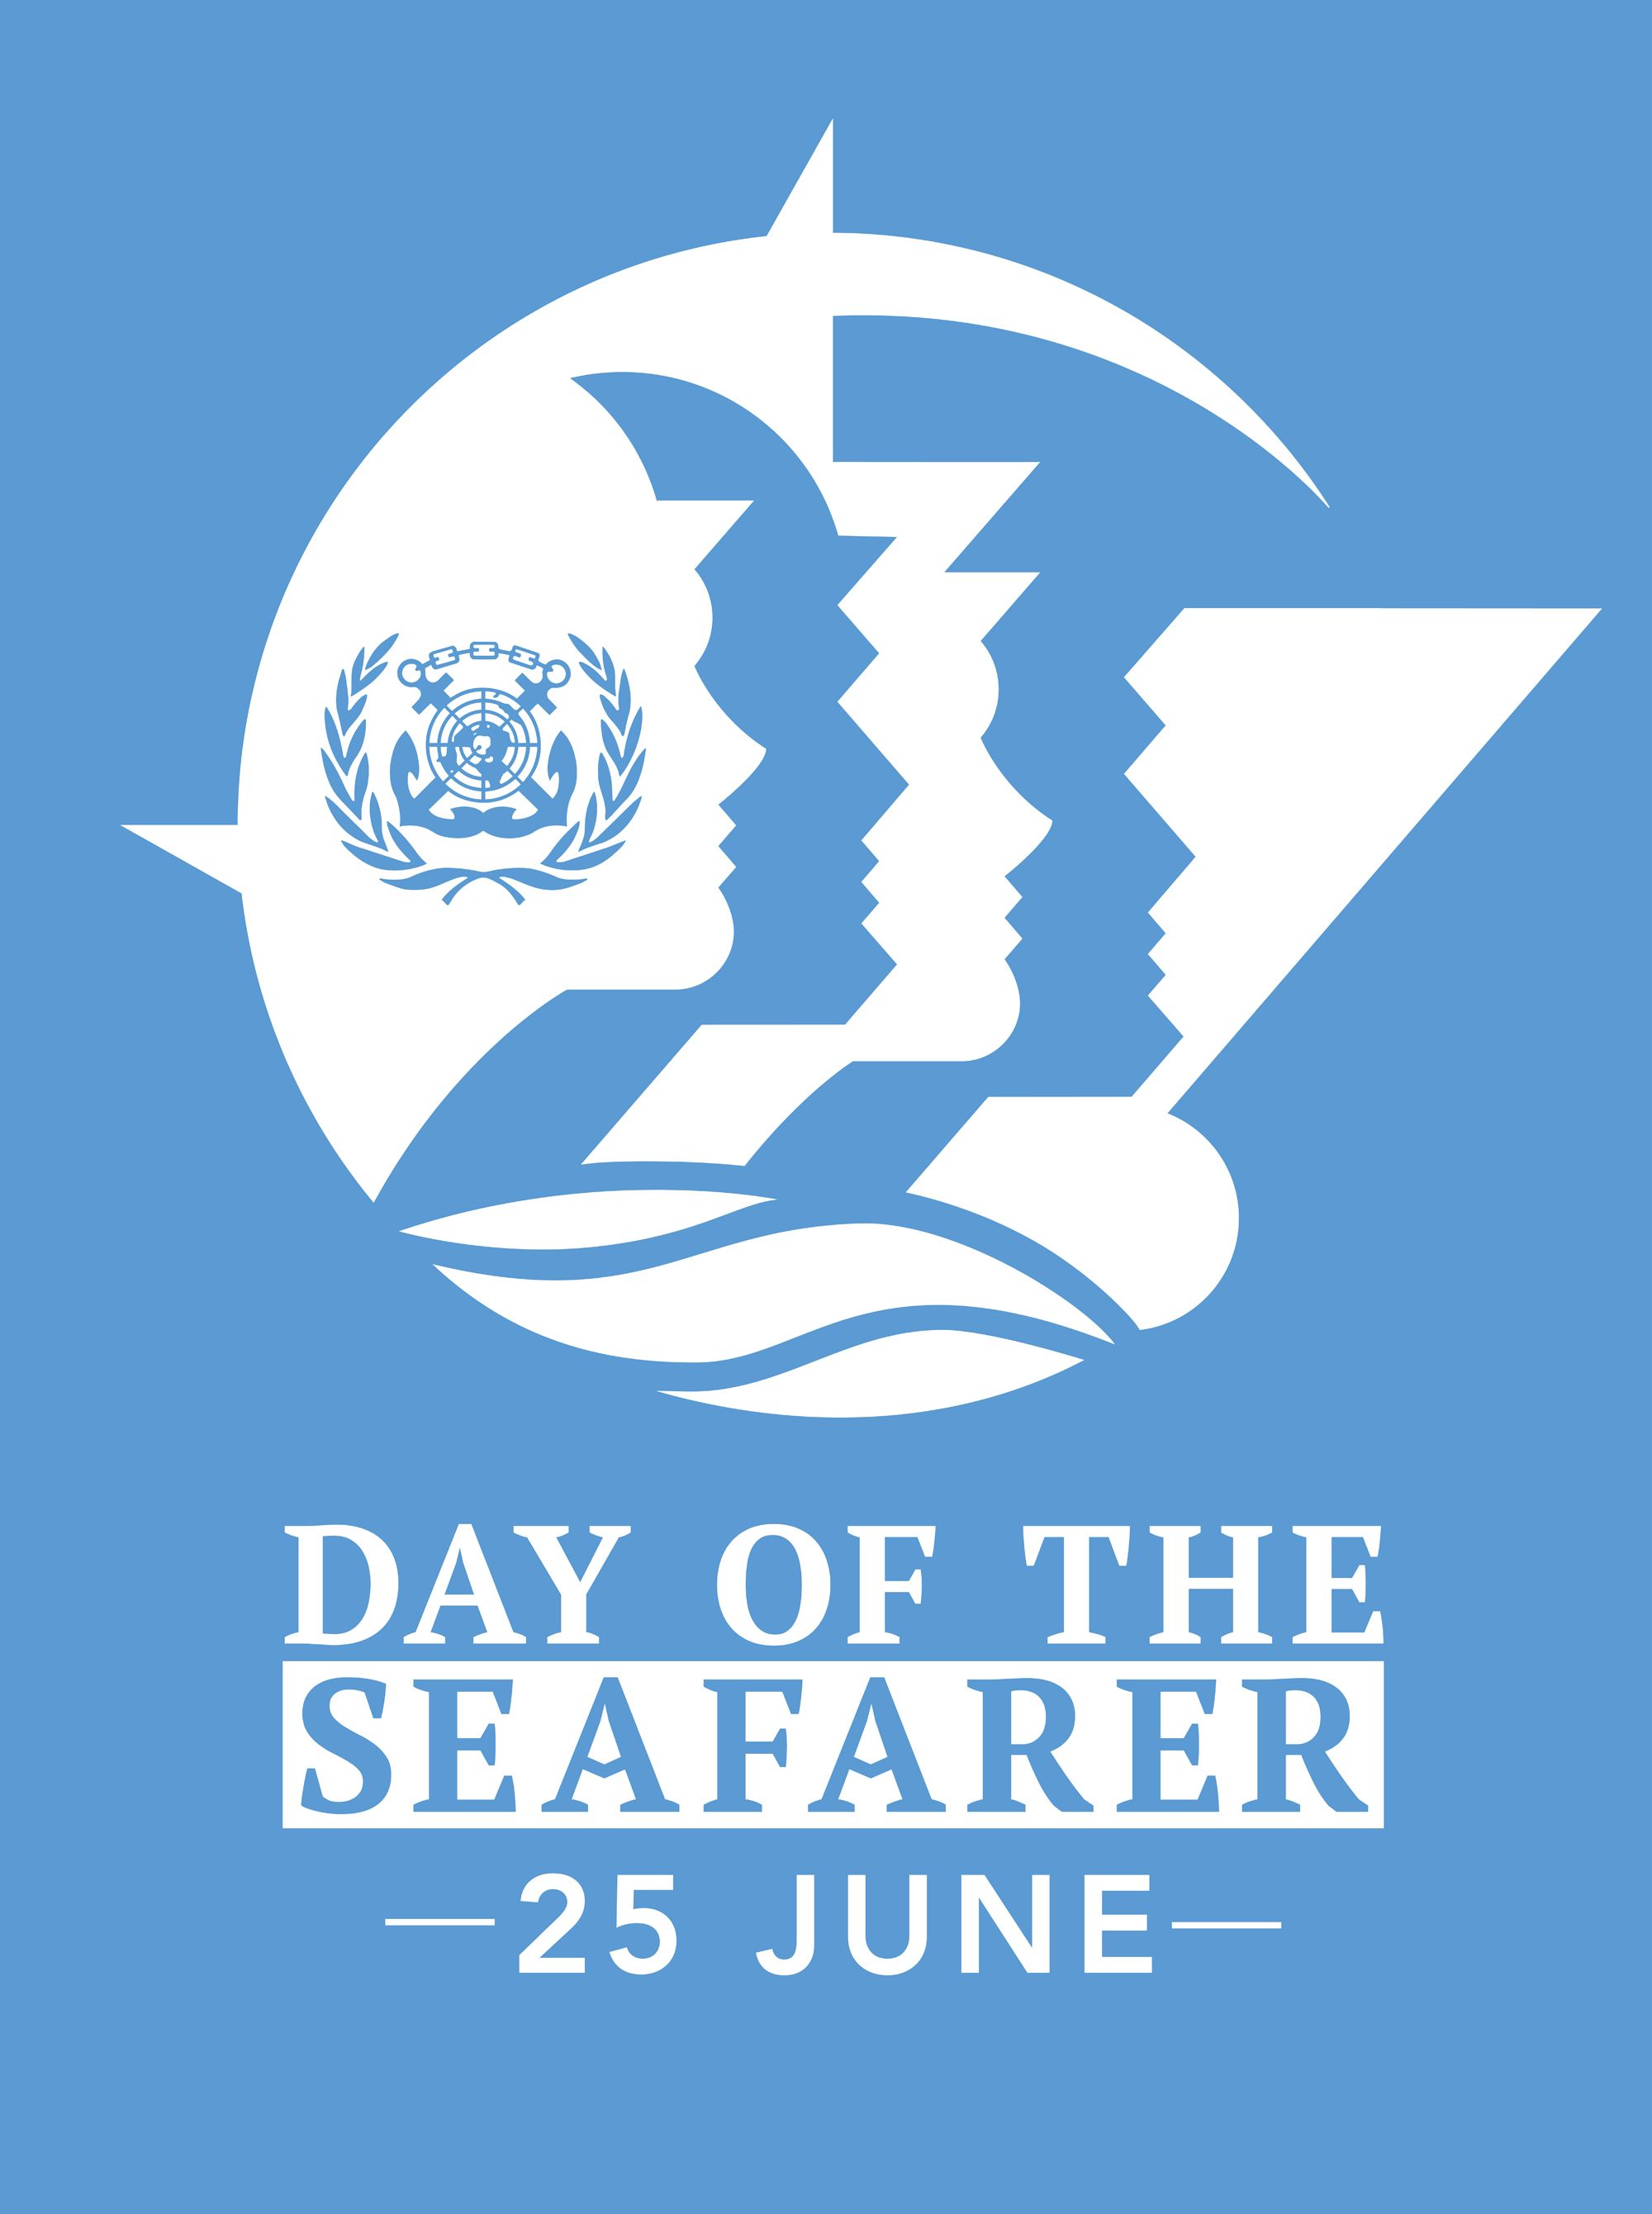 Day of the Seafarer logo